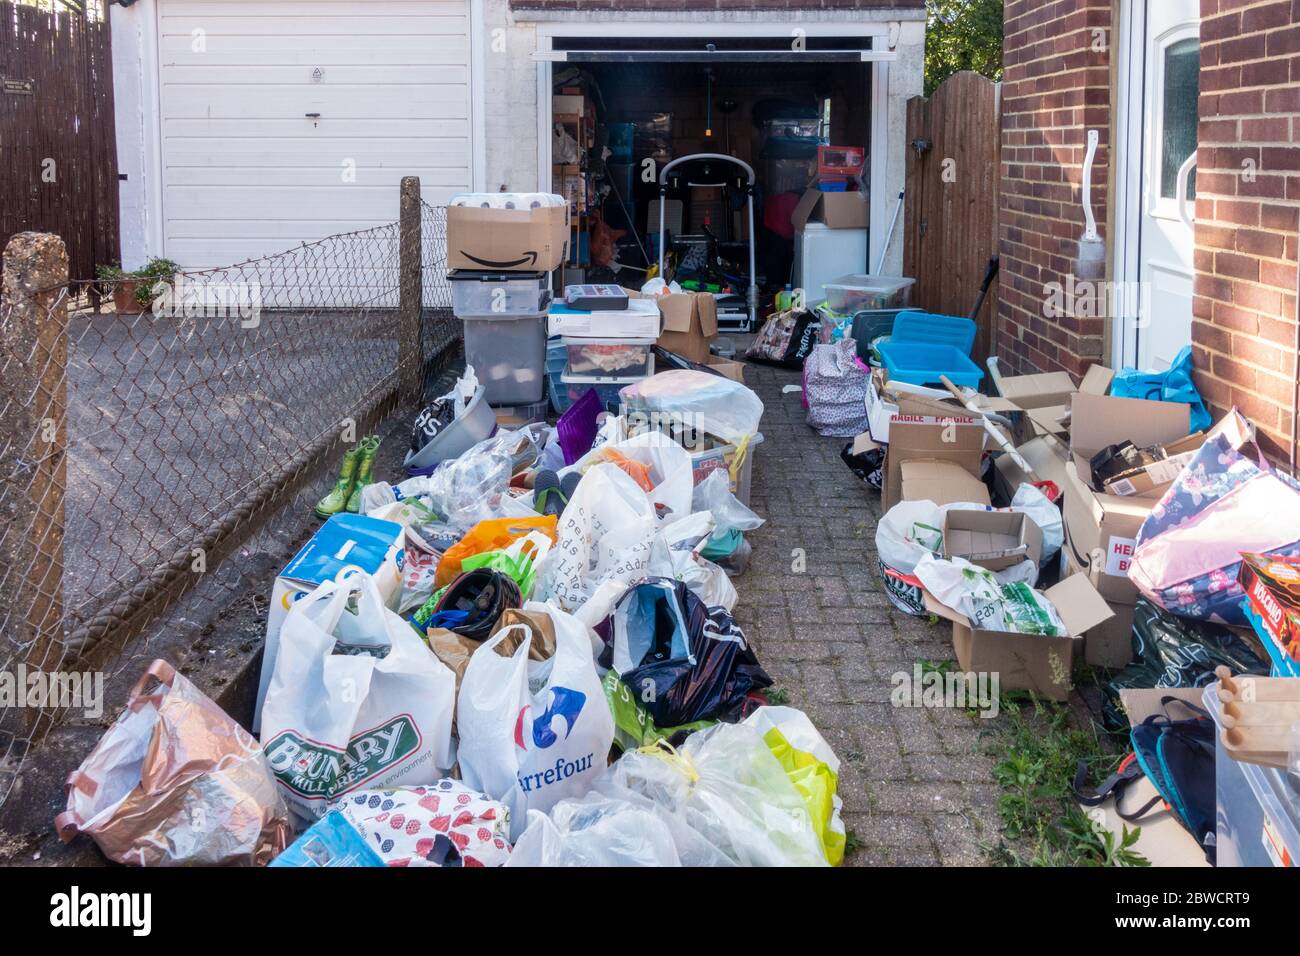 Clearing rubbish out of a residential garage. Sorting into piles to keep and throw away. Stock Photo